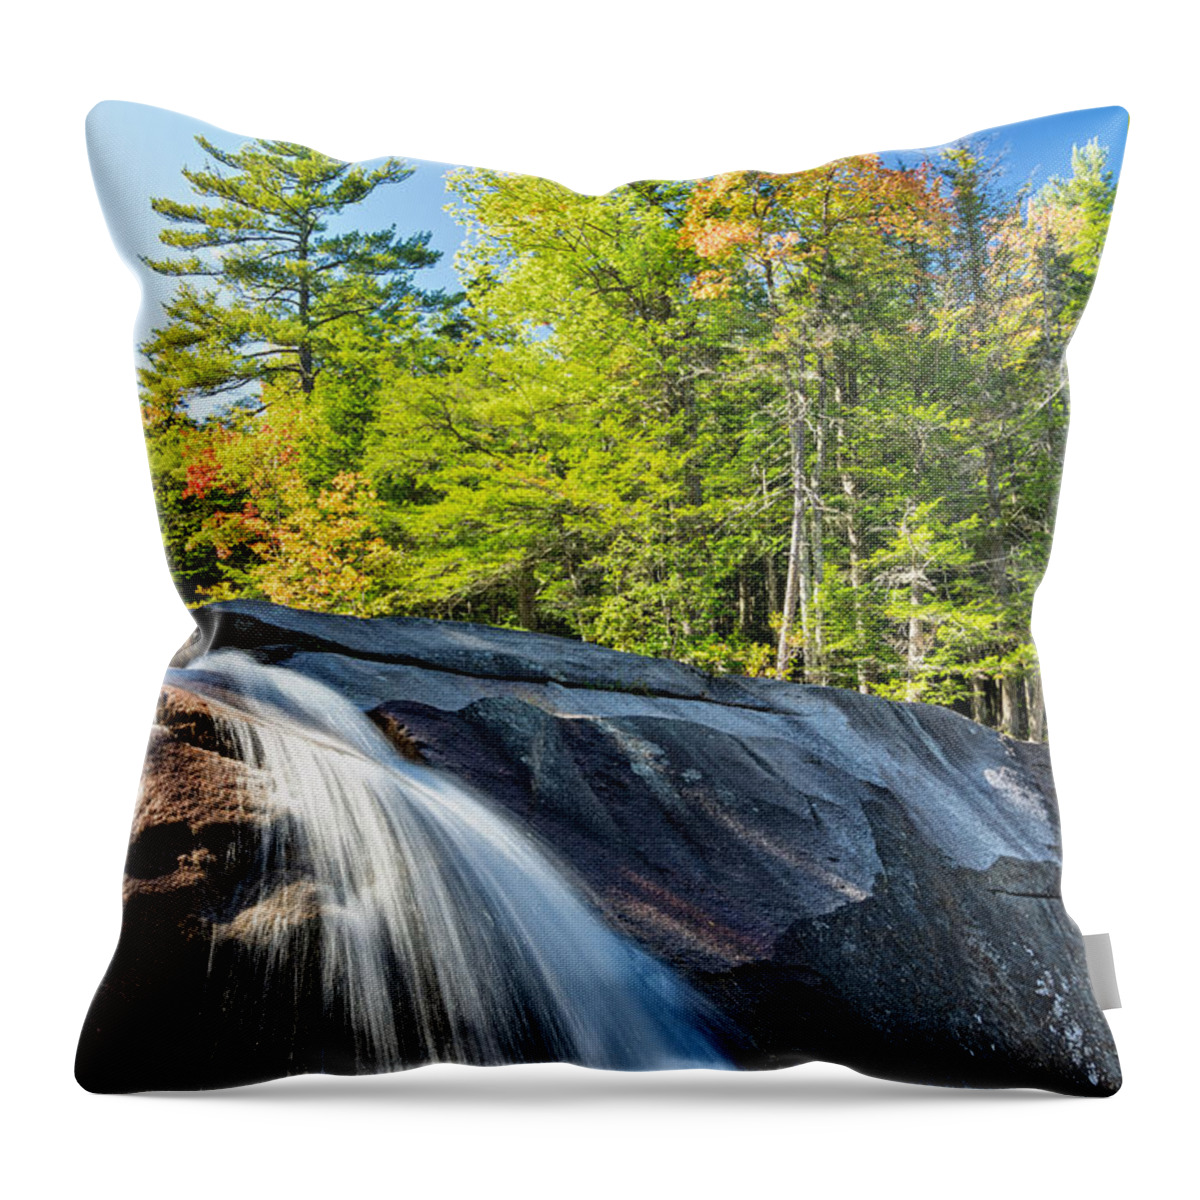 Diana's Baths Nh Throw Pillow featuring the photograph Falls Diana's Baths NH by Michael Hubley